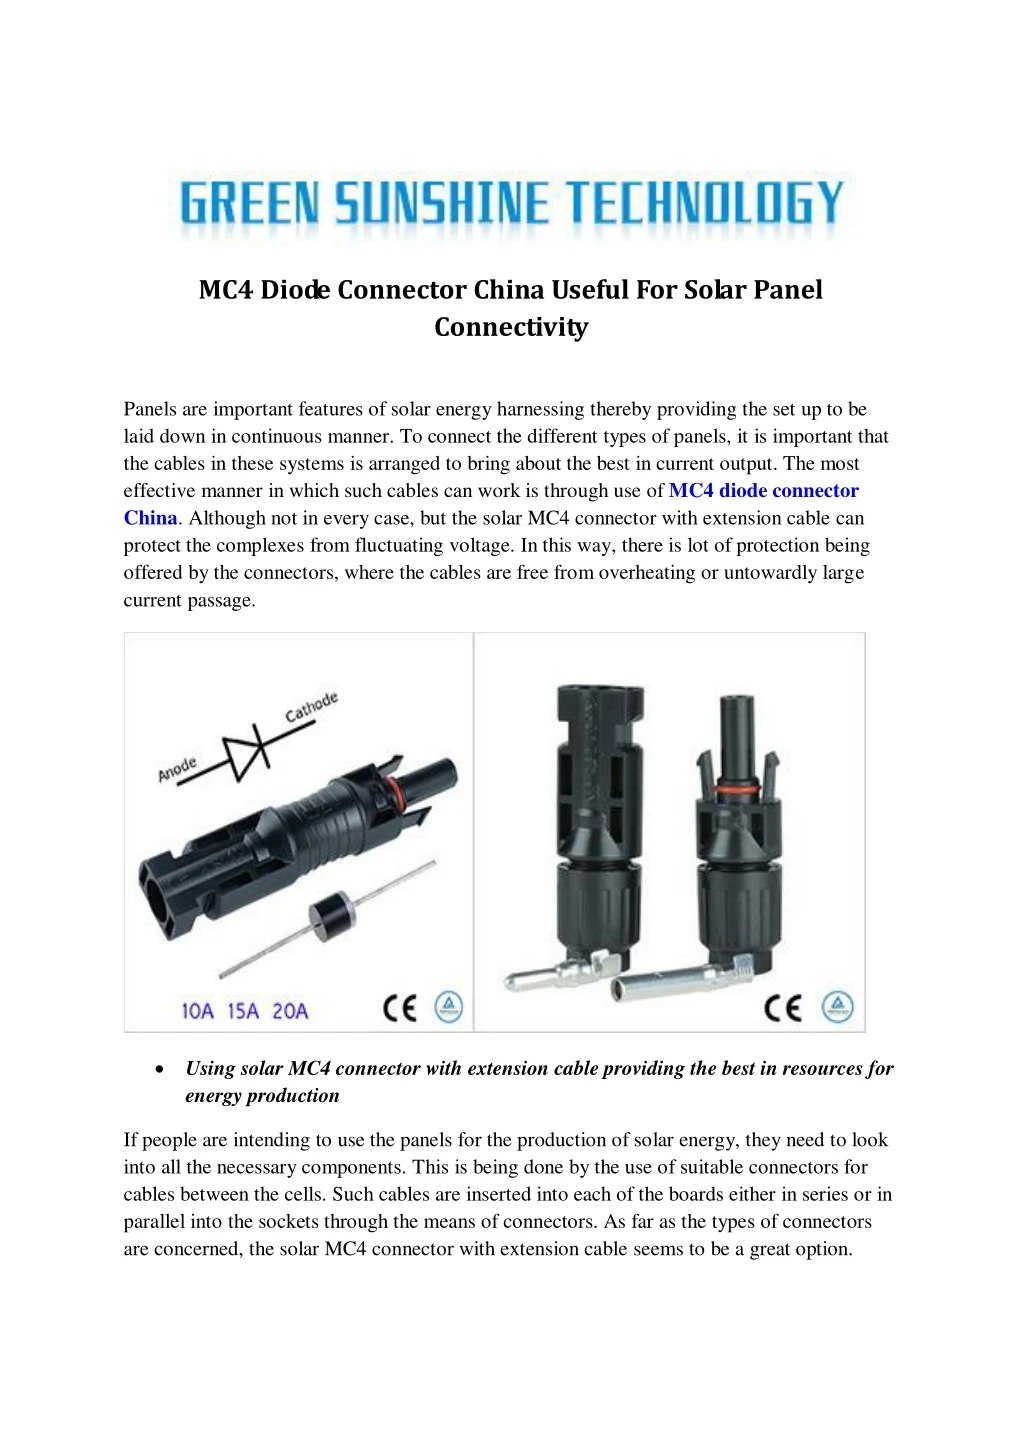 mc4 diode connector china useful for solar panel